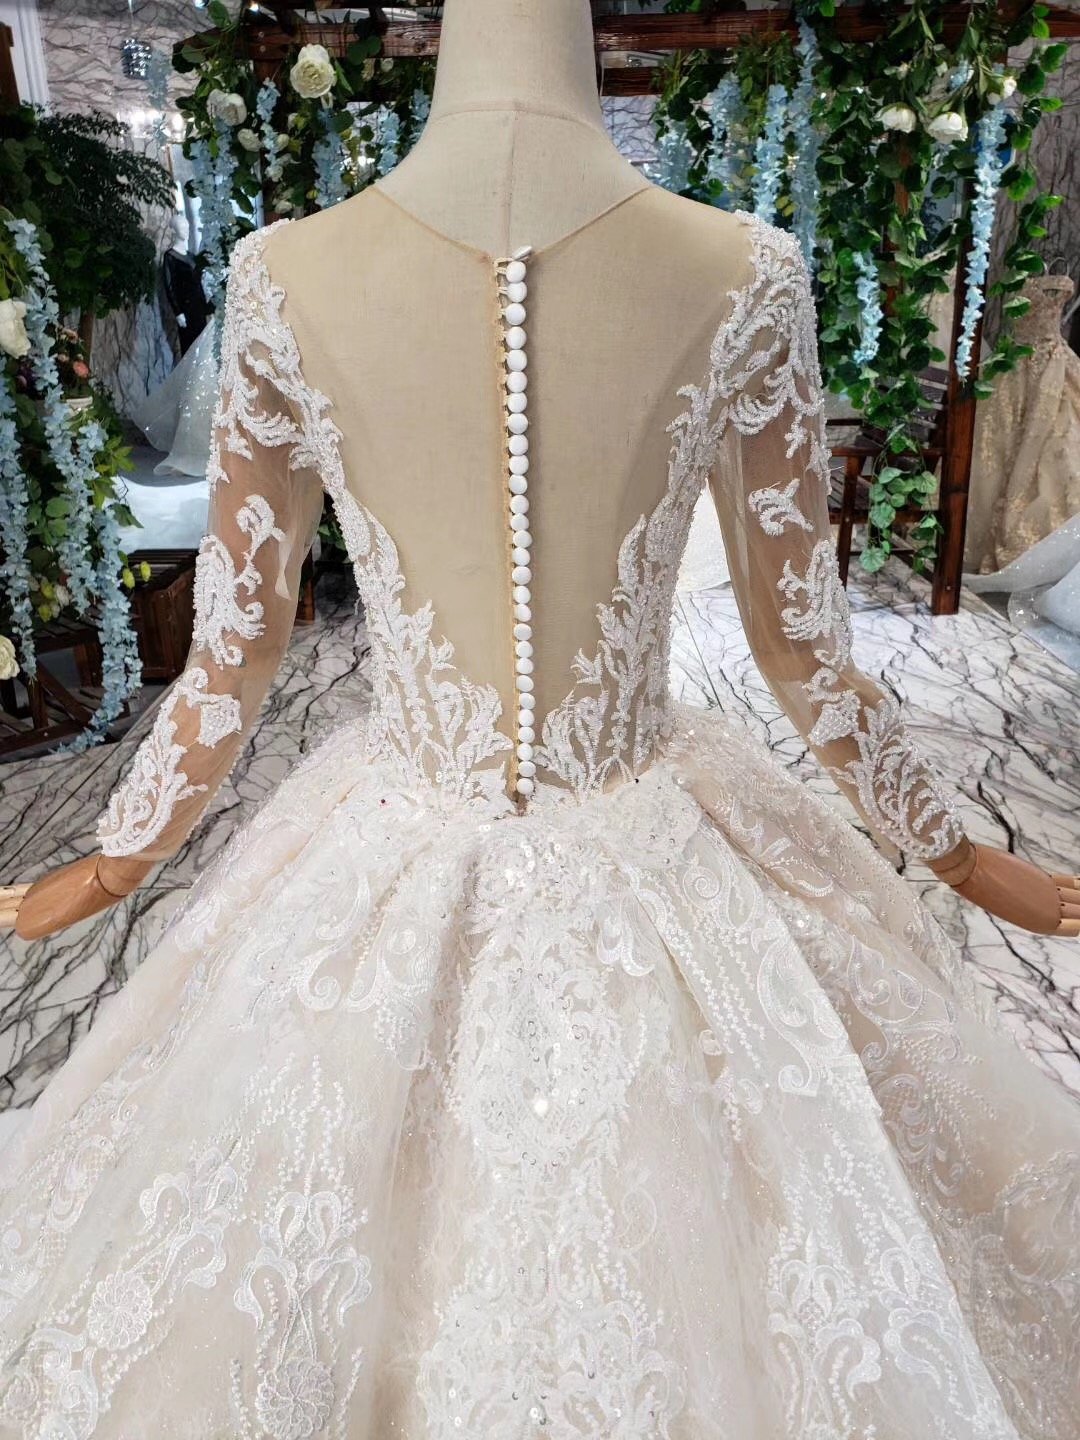 Princess Long Sleeve Beads Lace Appliques Ivory Prom Dresses Quinceanera Dresses P1070